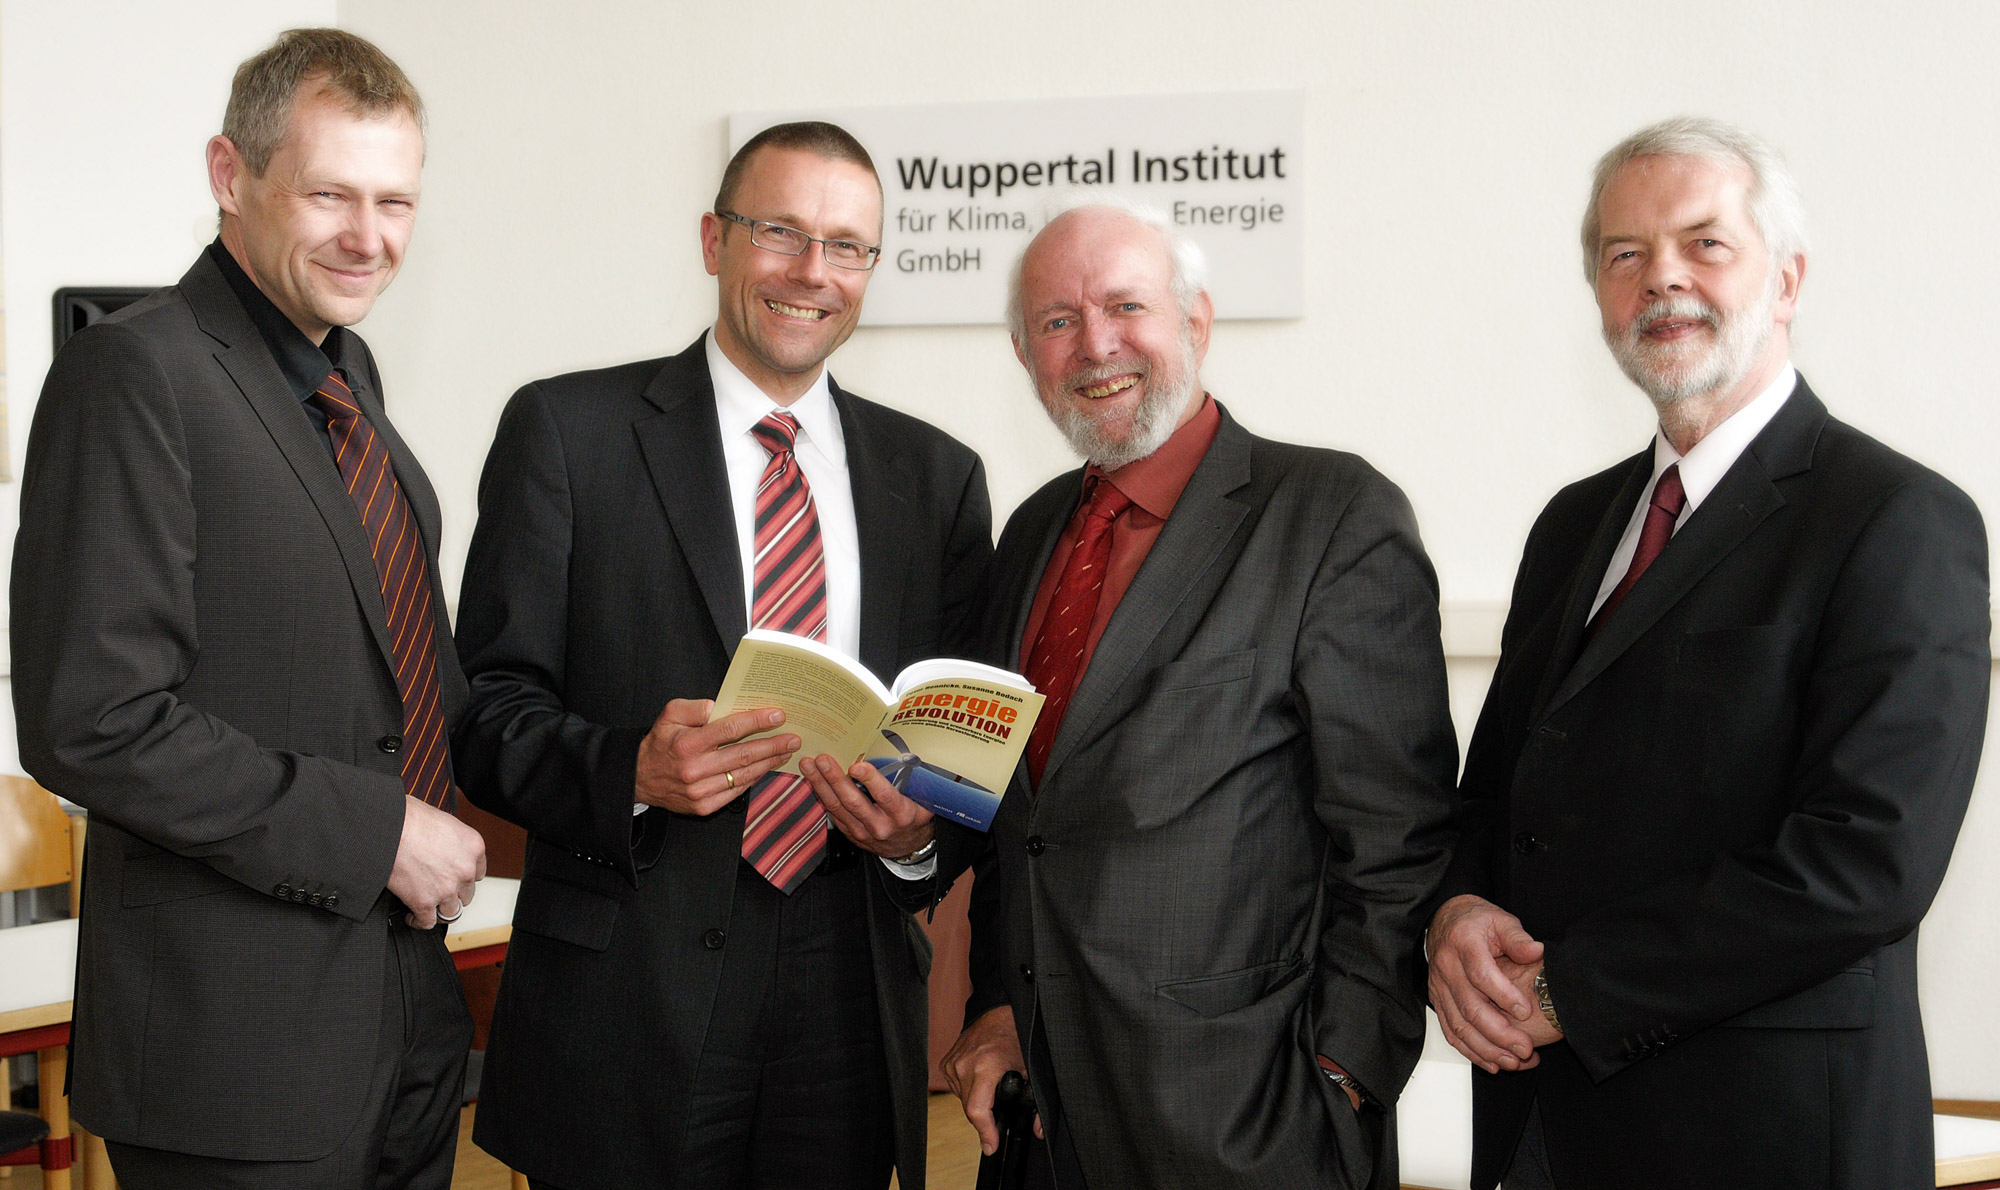 Presidents of the Wuppertal Institute